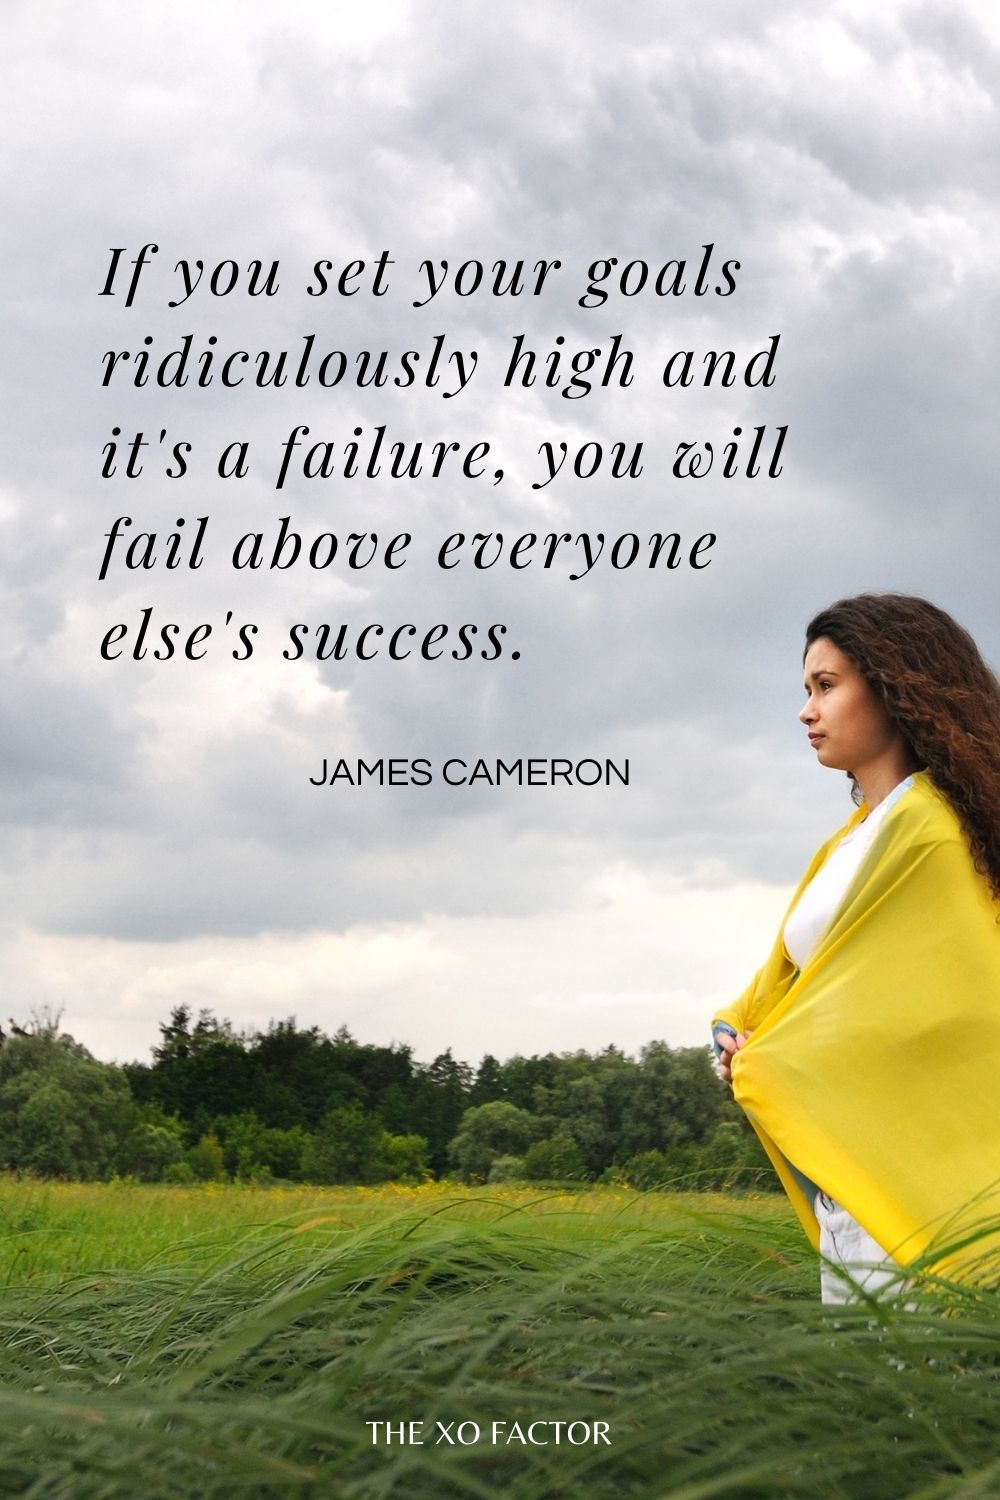 f you set your goals ridiculously high and it's a failure, you will fail above everyone else's success.  James Cameron